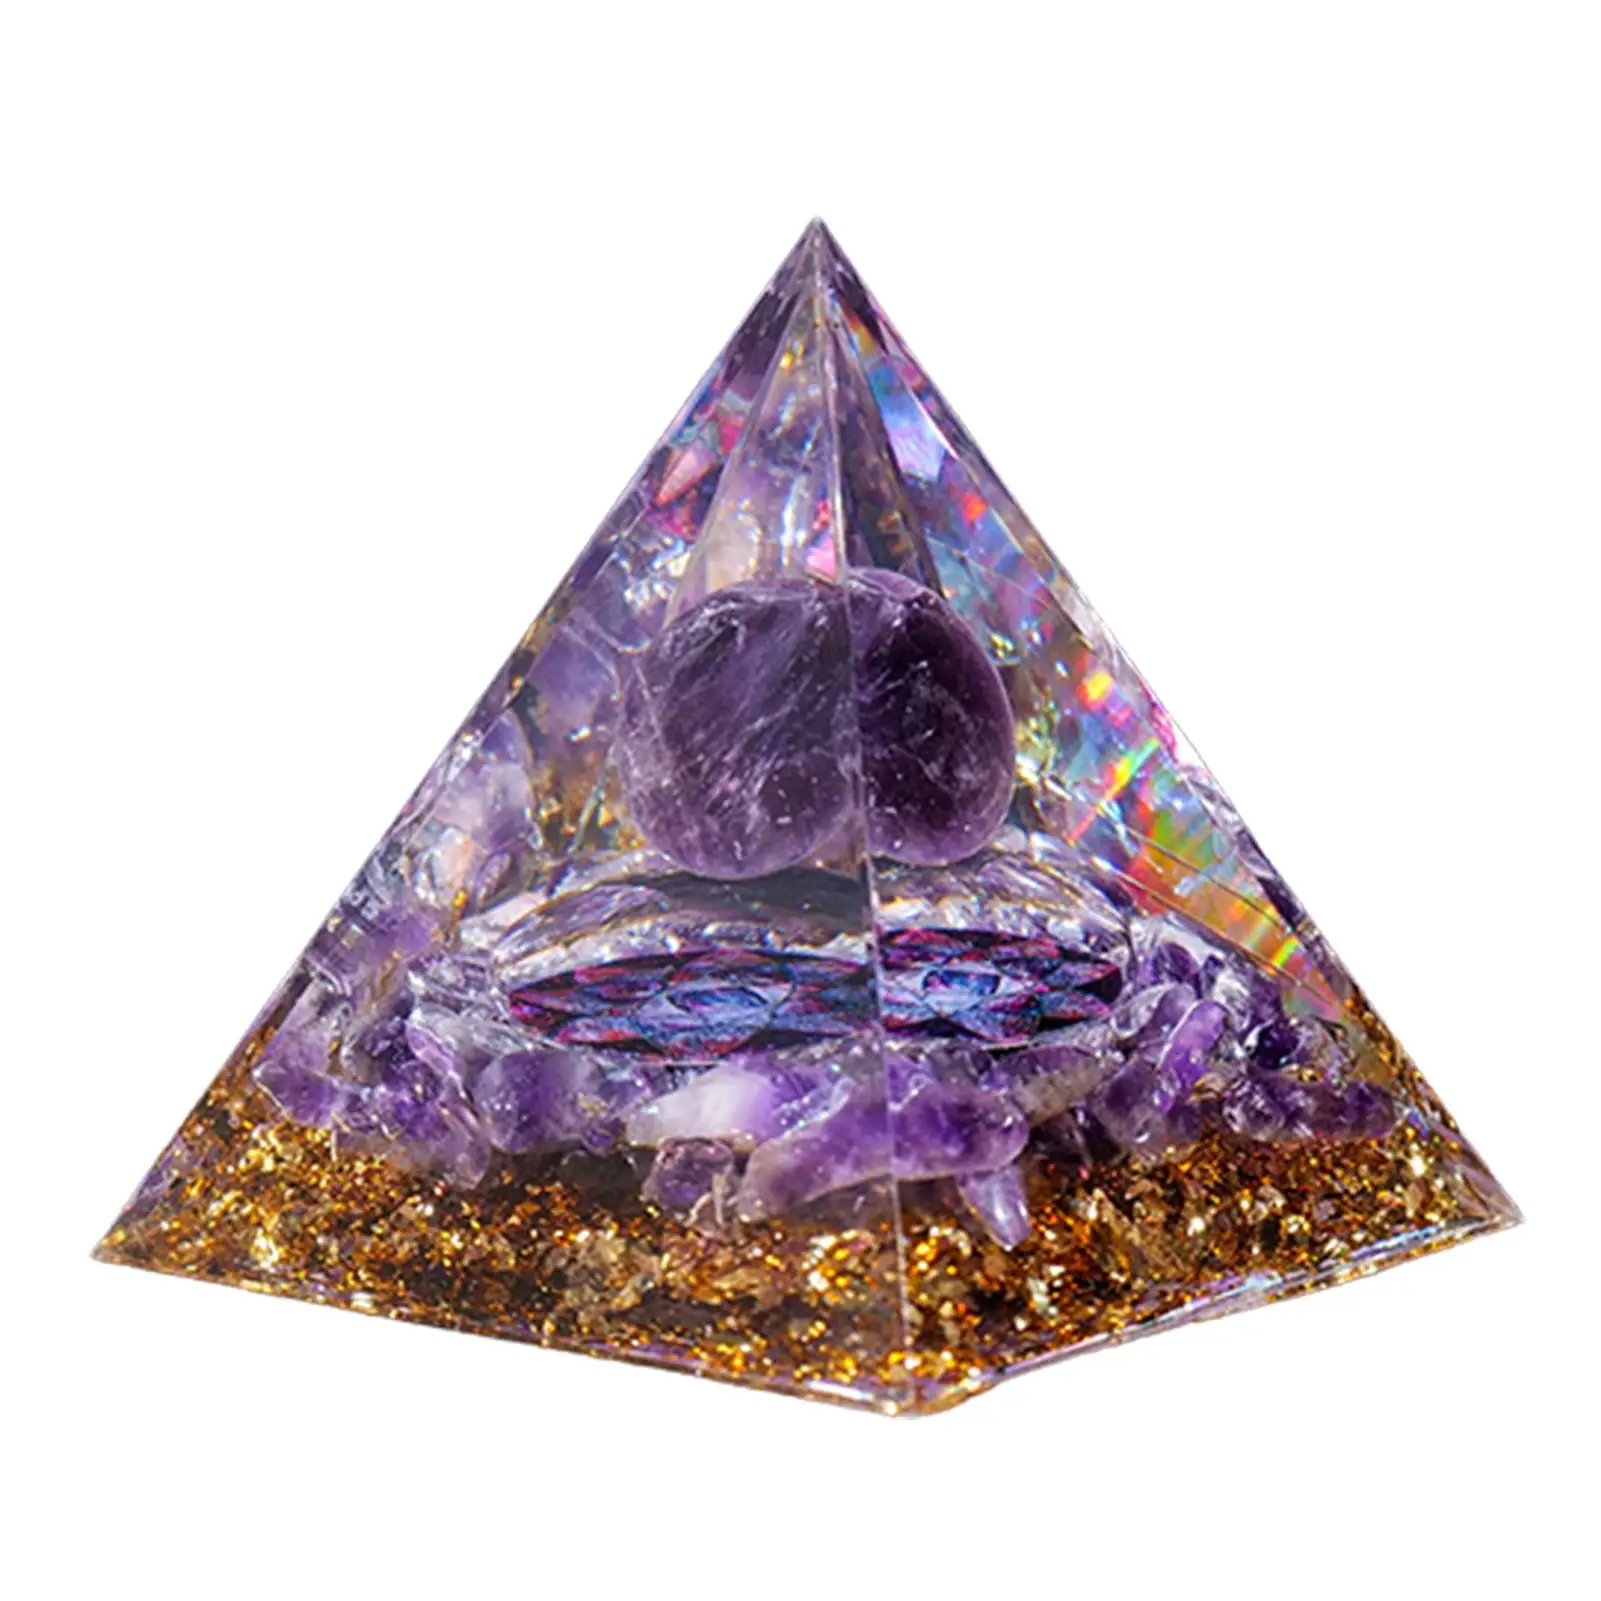 

Crystal Pyramid New Inspirational Feng Shui Crafts For Protection Rainbow Orgone Pyramid Bring Positive Energy Healing Crystals